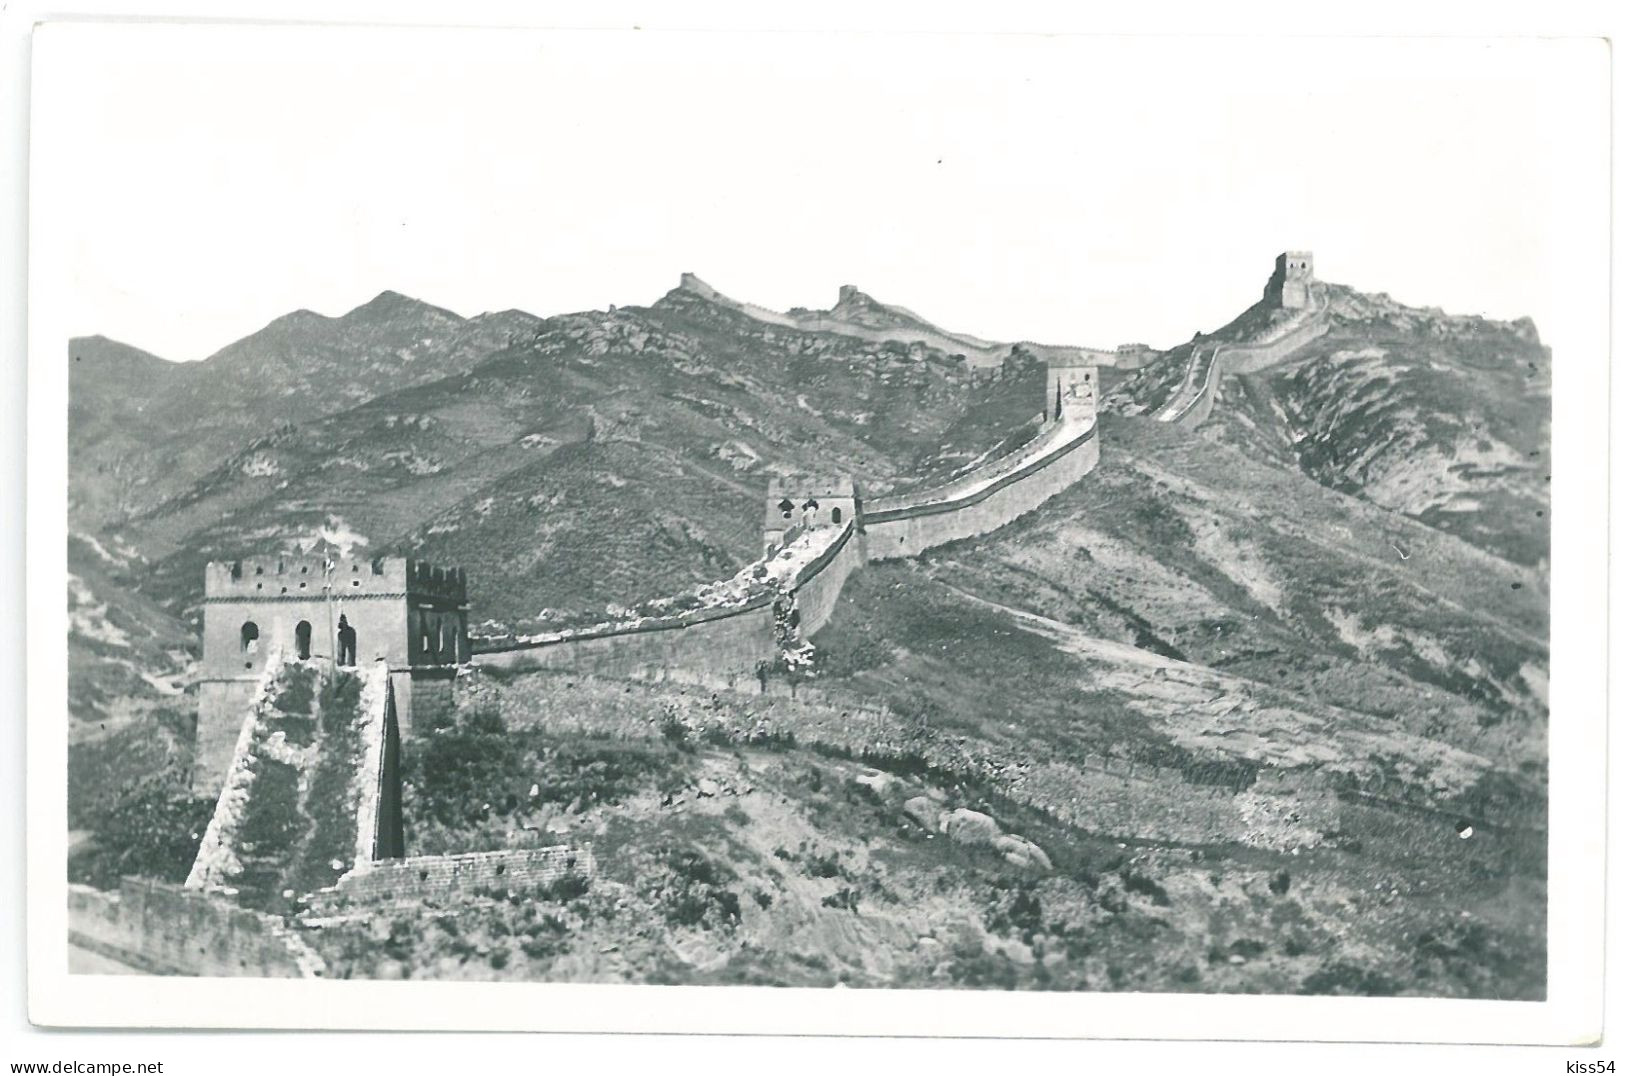 CH 37 - 24999 The Great WALL, China - Old Postcard, Real Photo - Unused - China